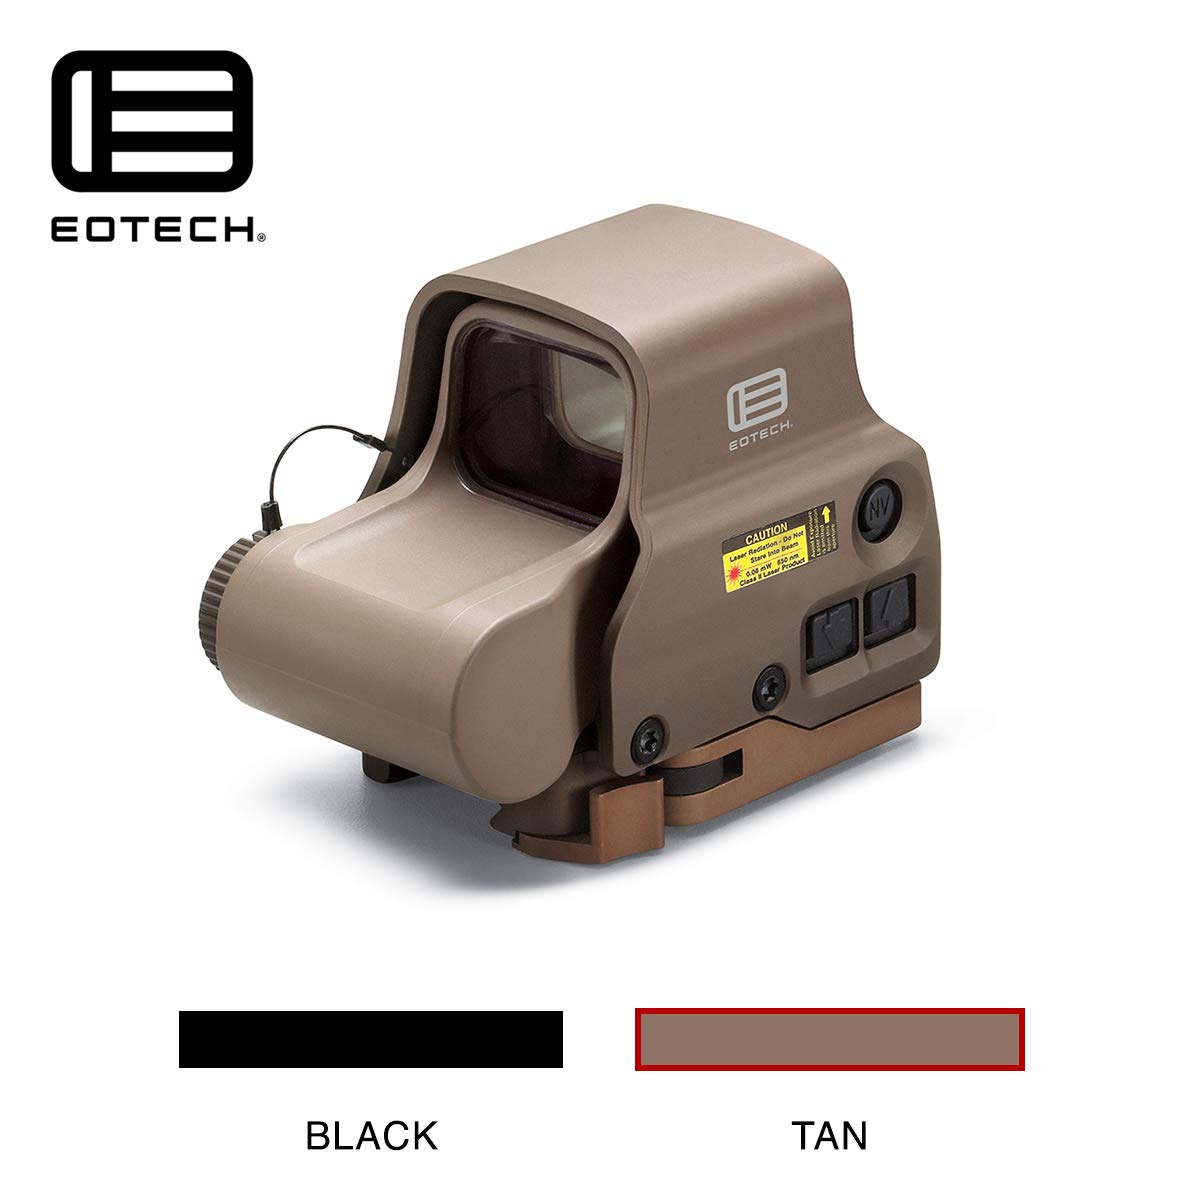 EOTECH Holographic Weapon Sight TAN 68MOA Ring & 1 MOA Dot - EXPS3 